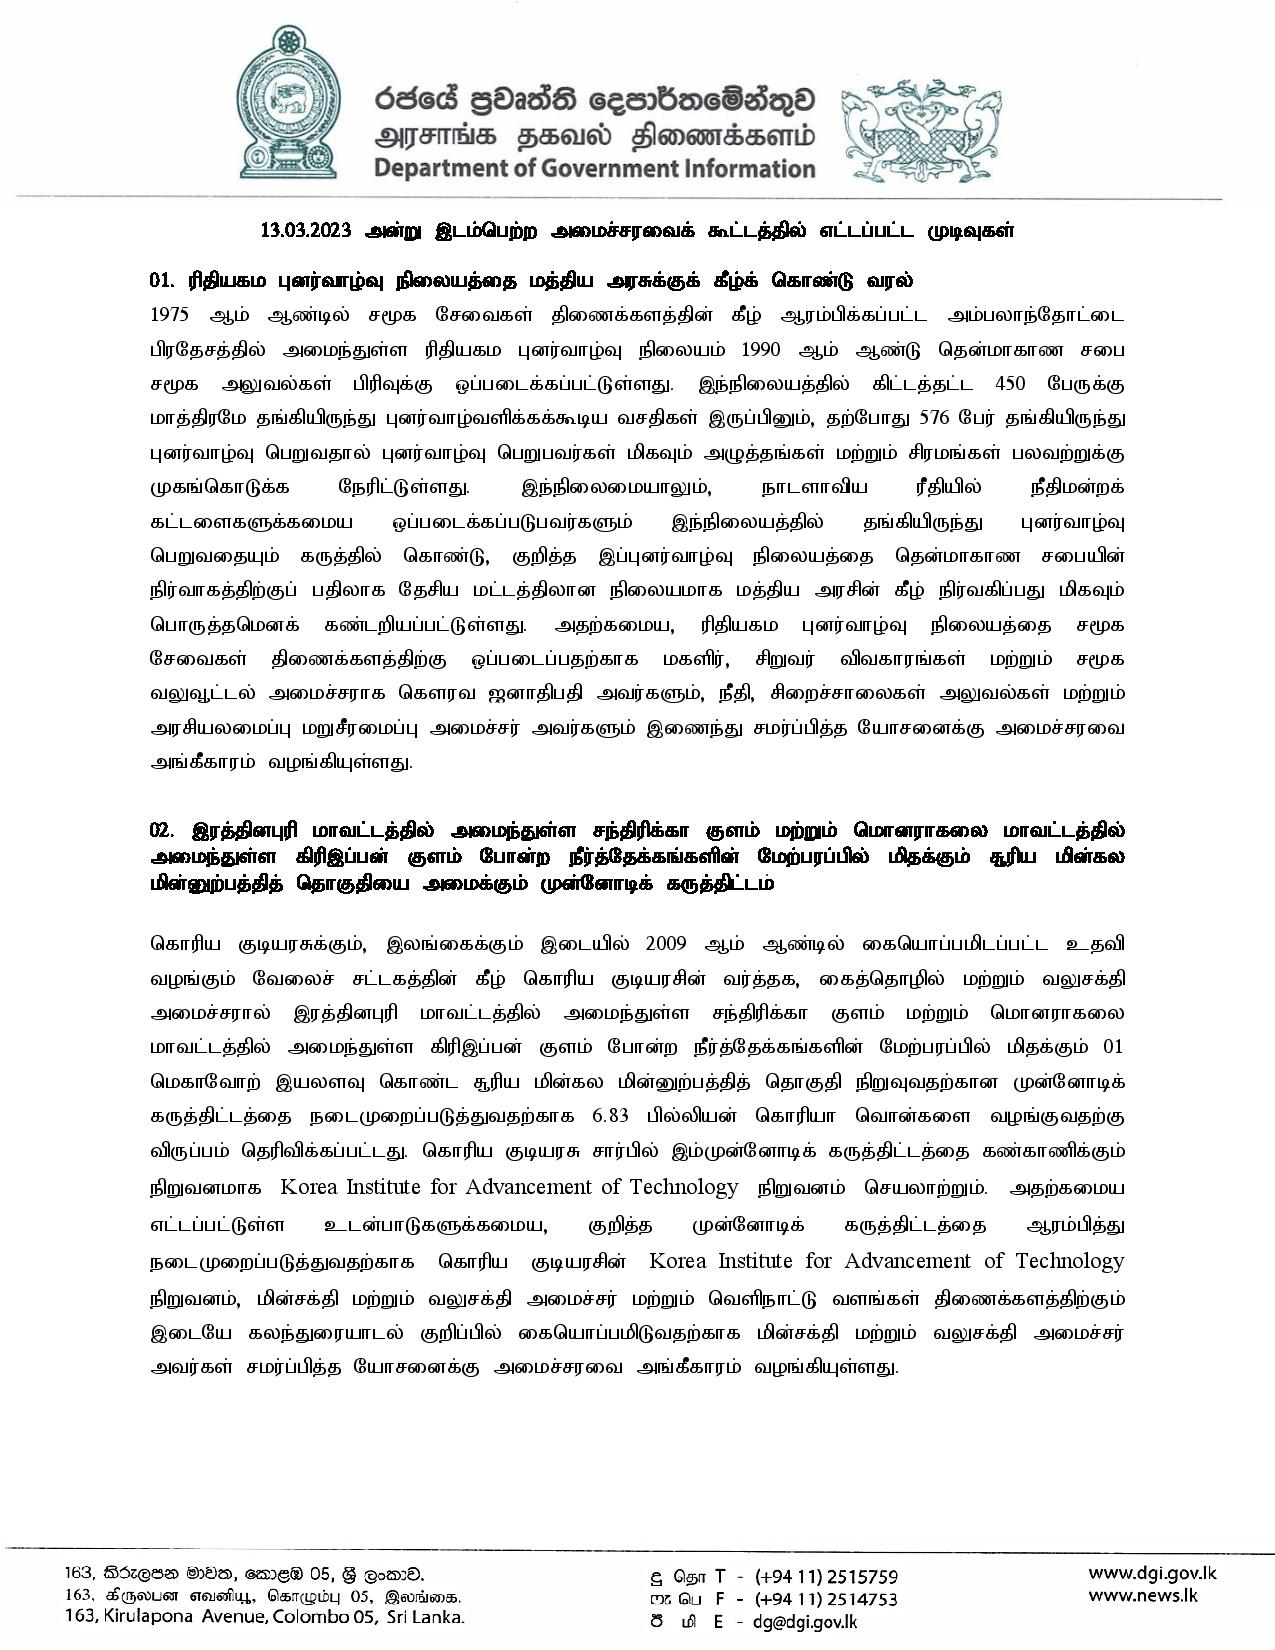 Cabinet Decisions on 13.03.2023 Tamil page 001 1